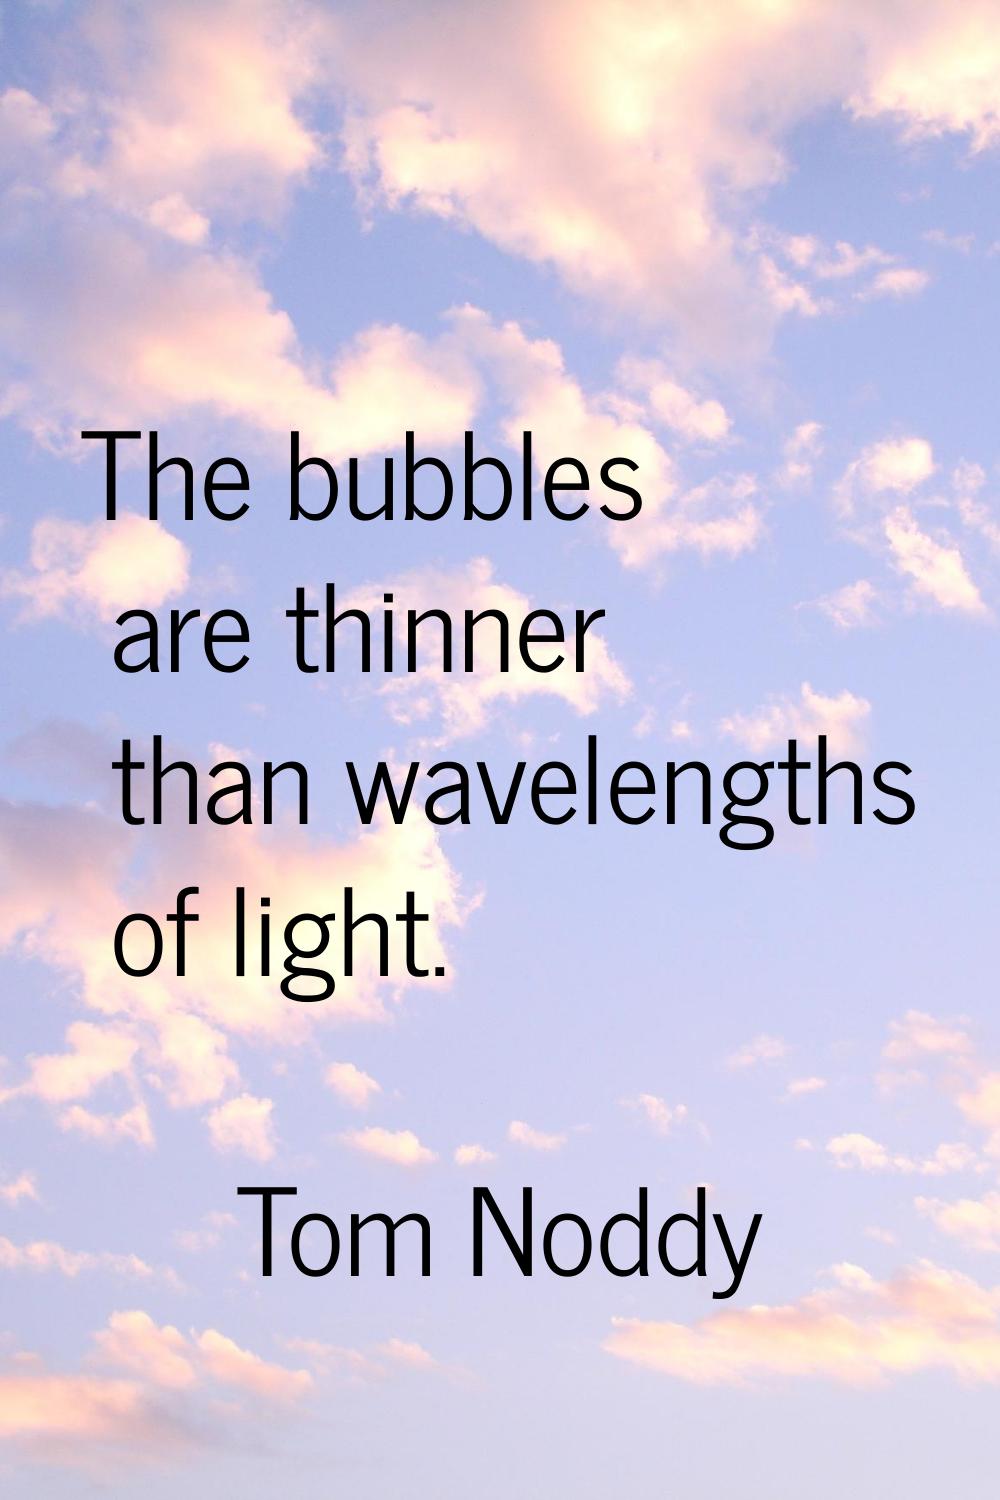 The bubbles are thinner than wavelengths of light.